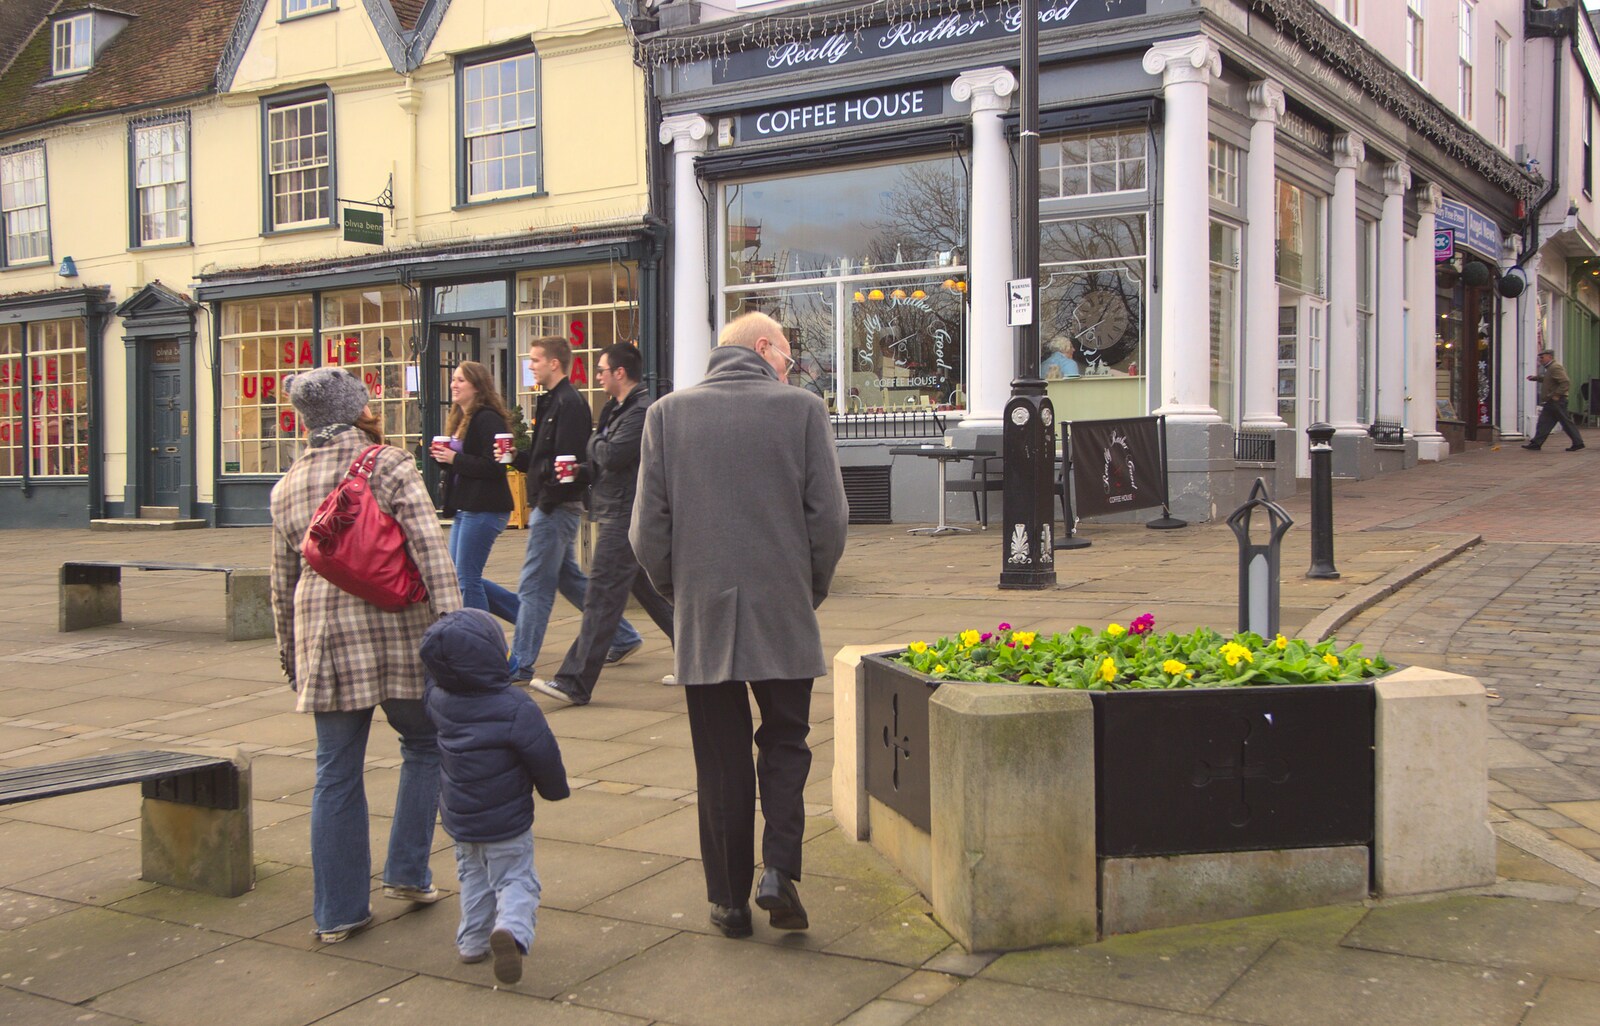 Isobel, Fred and Grandad from Pizza Express with Grandad, Bury St. Edmunds, Suffolk - 29th December 2011